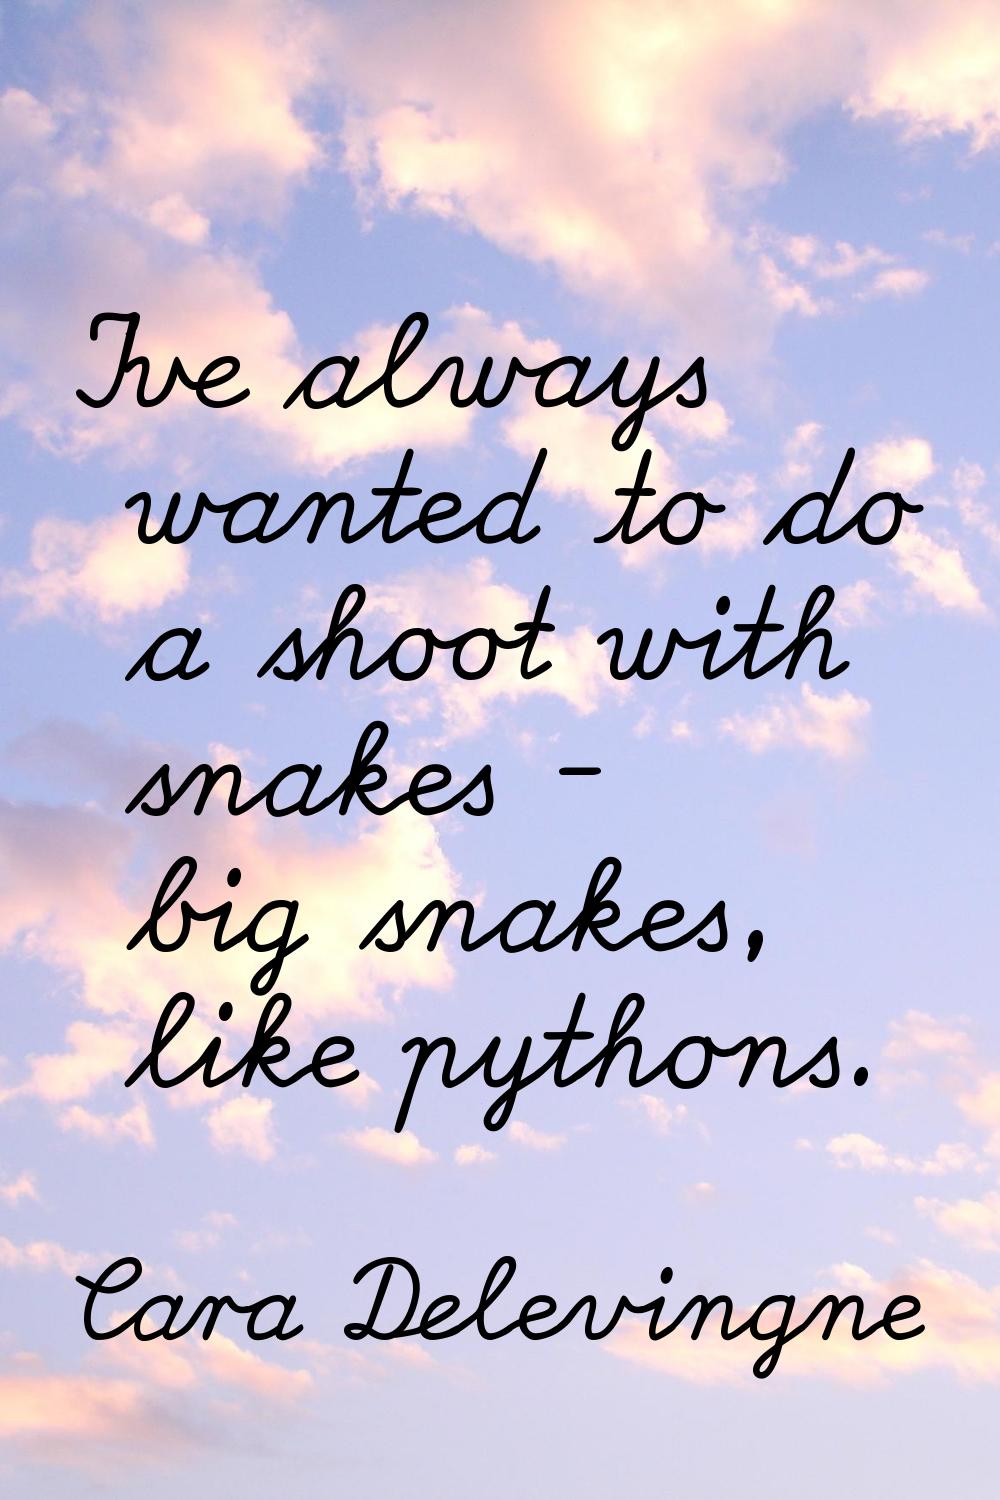 I've always wanted to do a shoot with snakes - big snakes, like pythons.